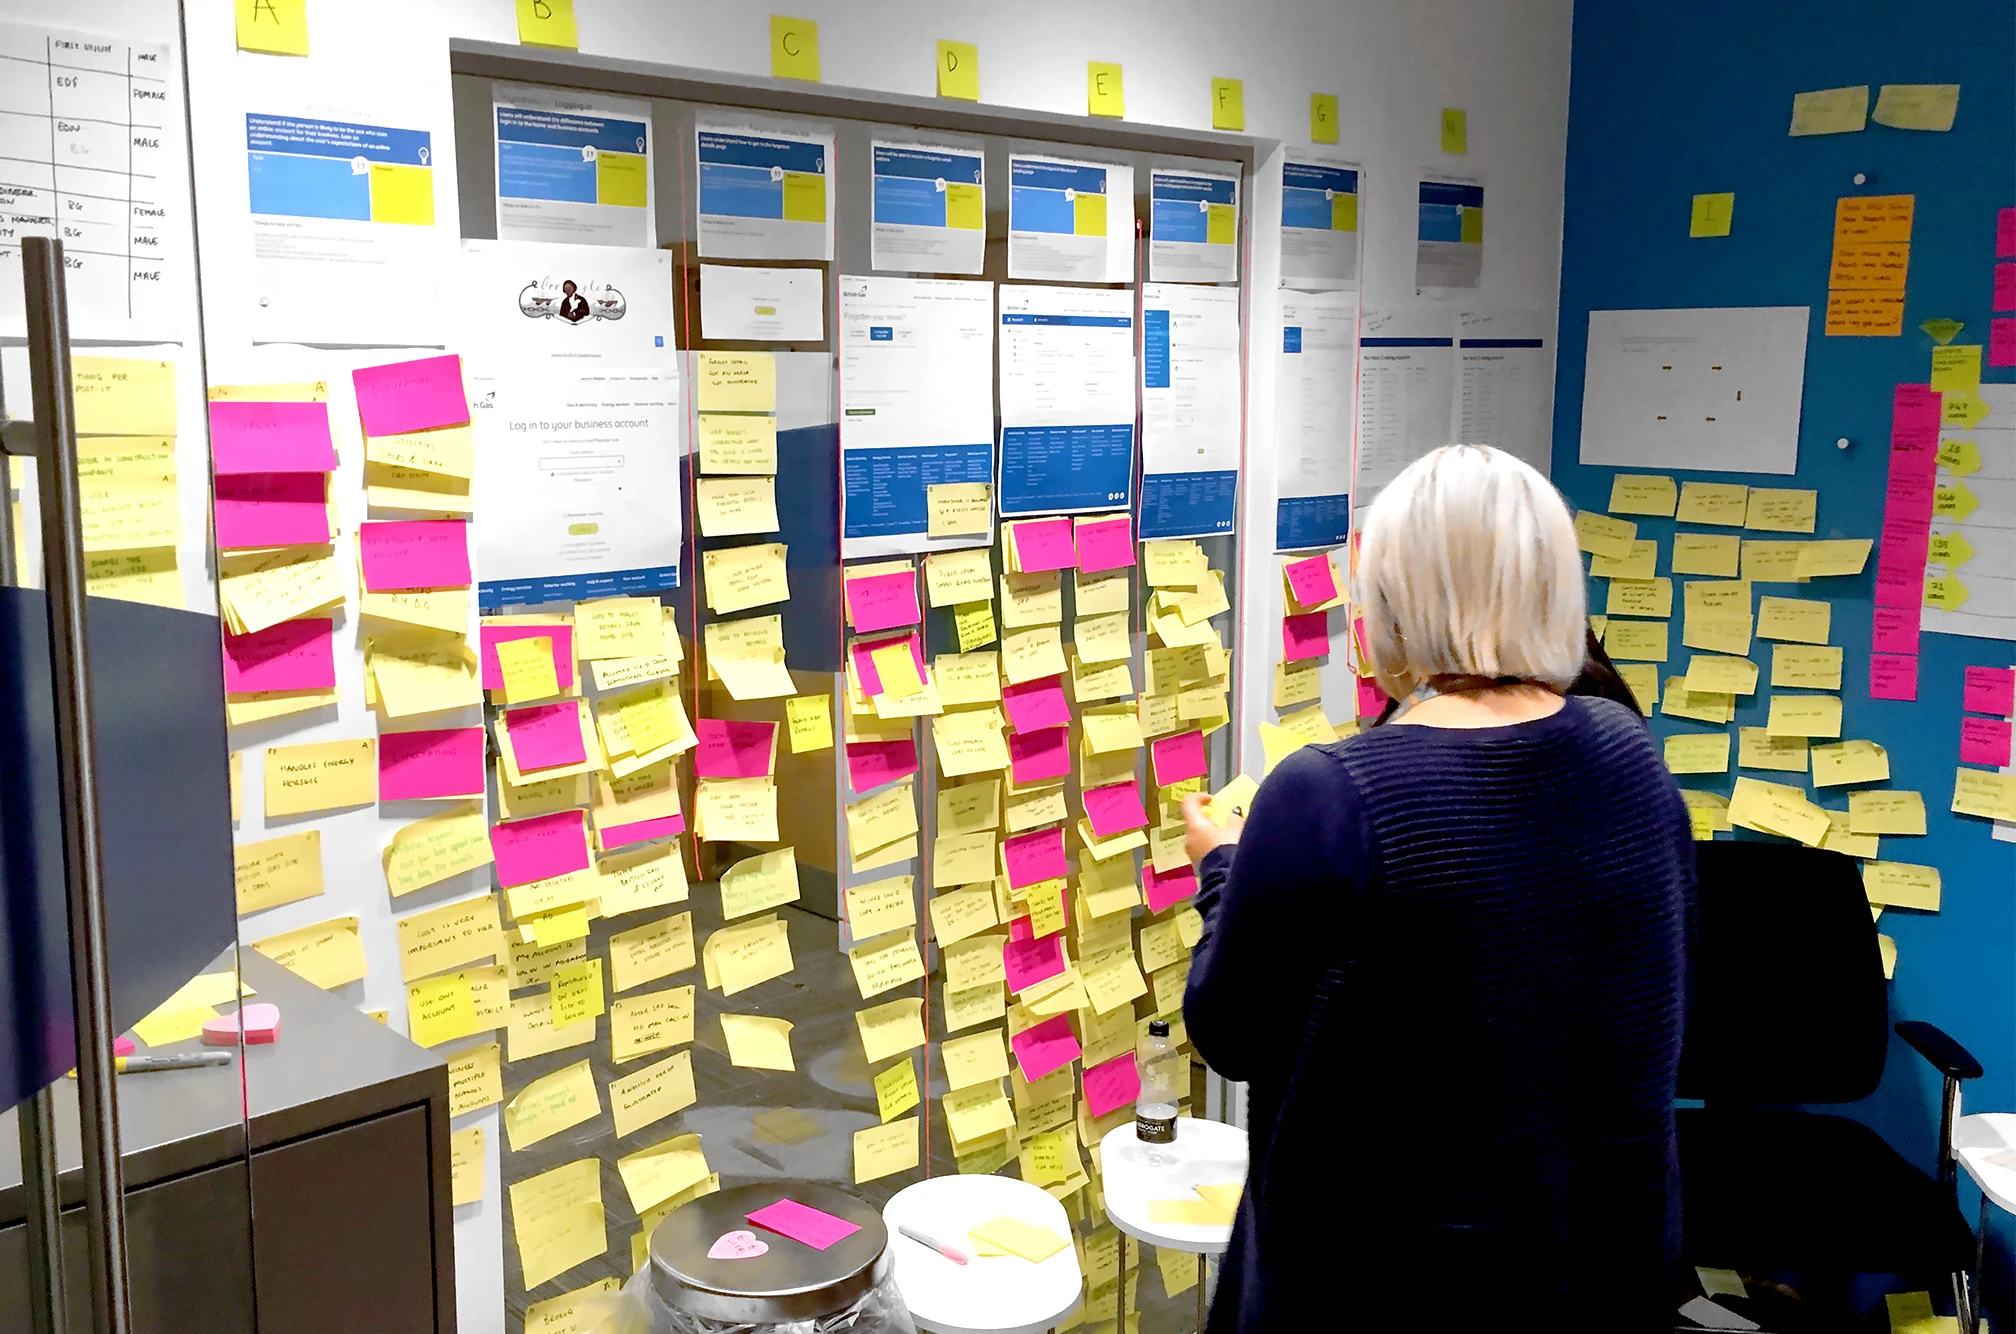 Two colleagues looking at the wall of post-its